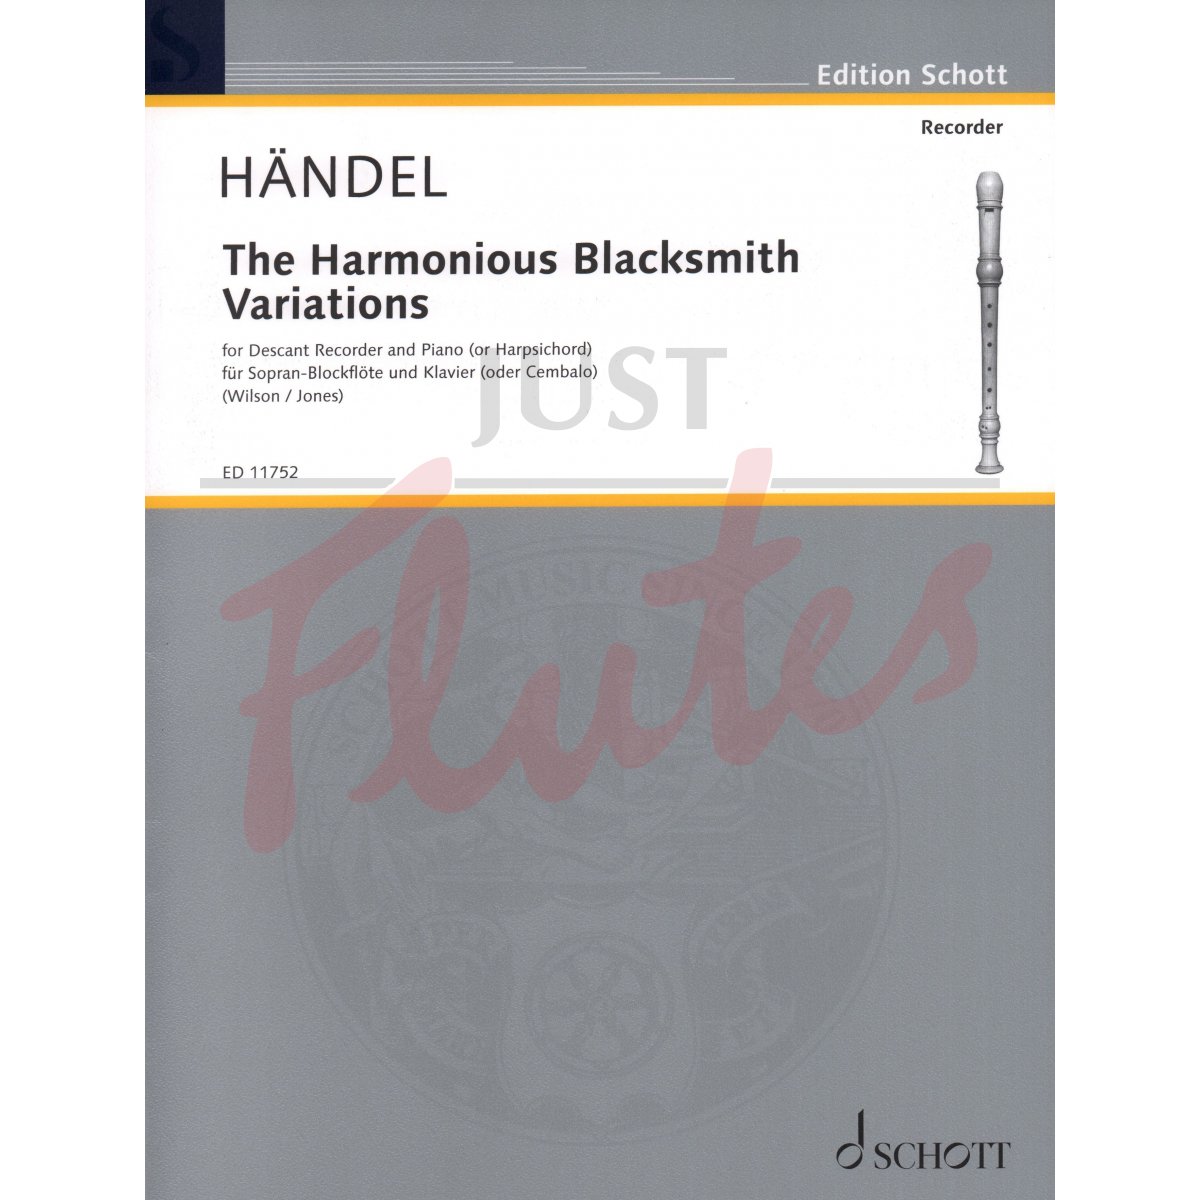 The Harmonious Blacksmith Variations for Descant Recorder and Piano